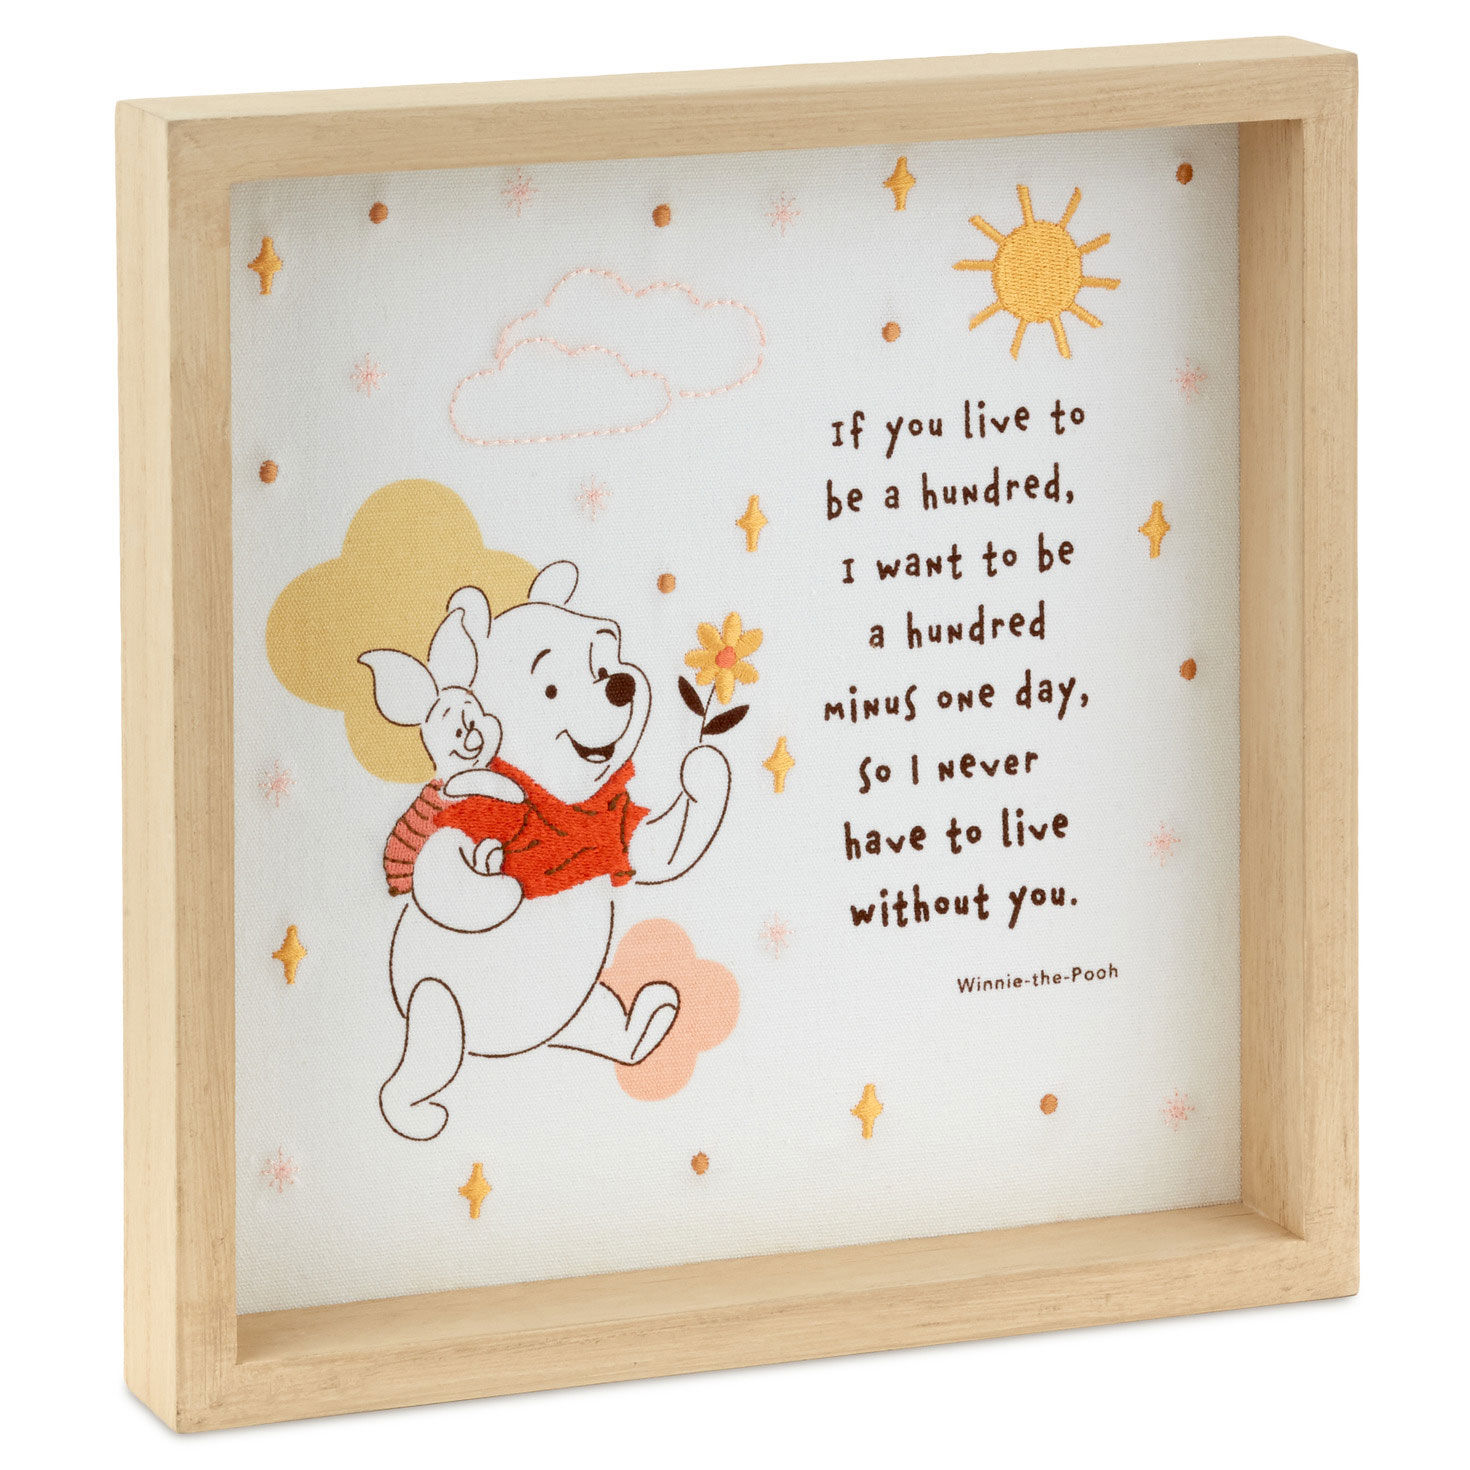 Disney Winnie the Pooh Framed Quote Sign, 10x10 for only USD 29.99 | Hallmark